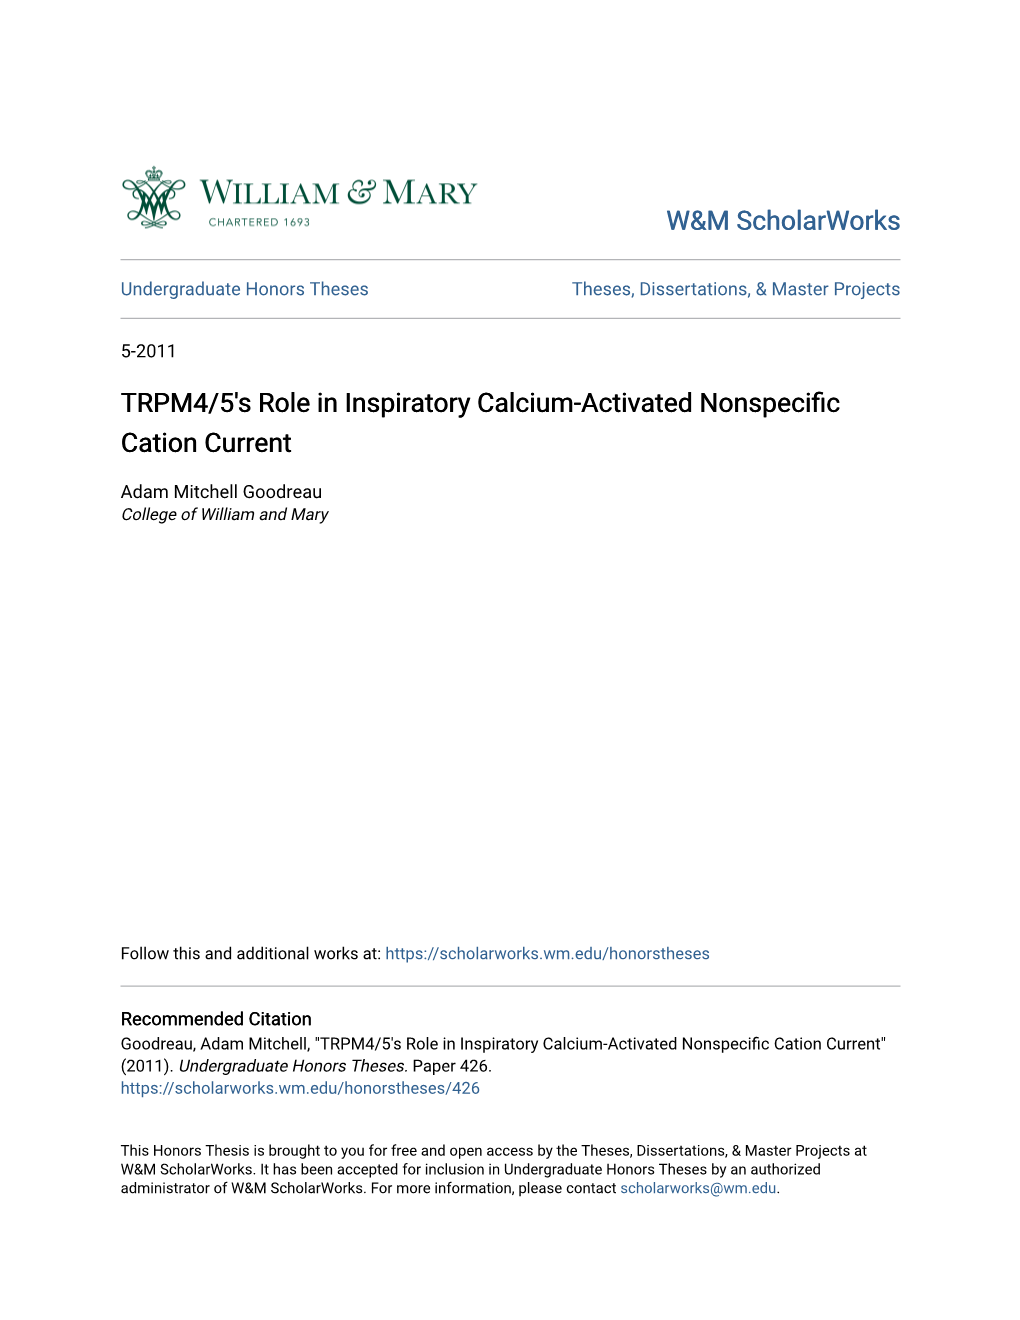 TRPM4/5'S Role in Inspiratory Calcium-Activated Nonspecific Cation Current